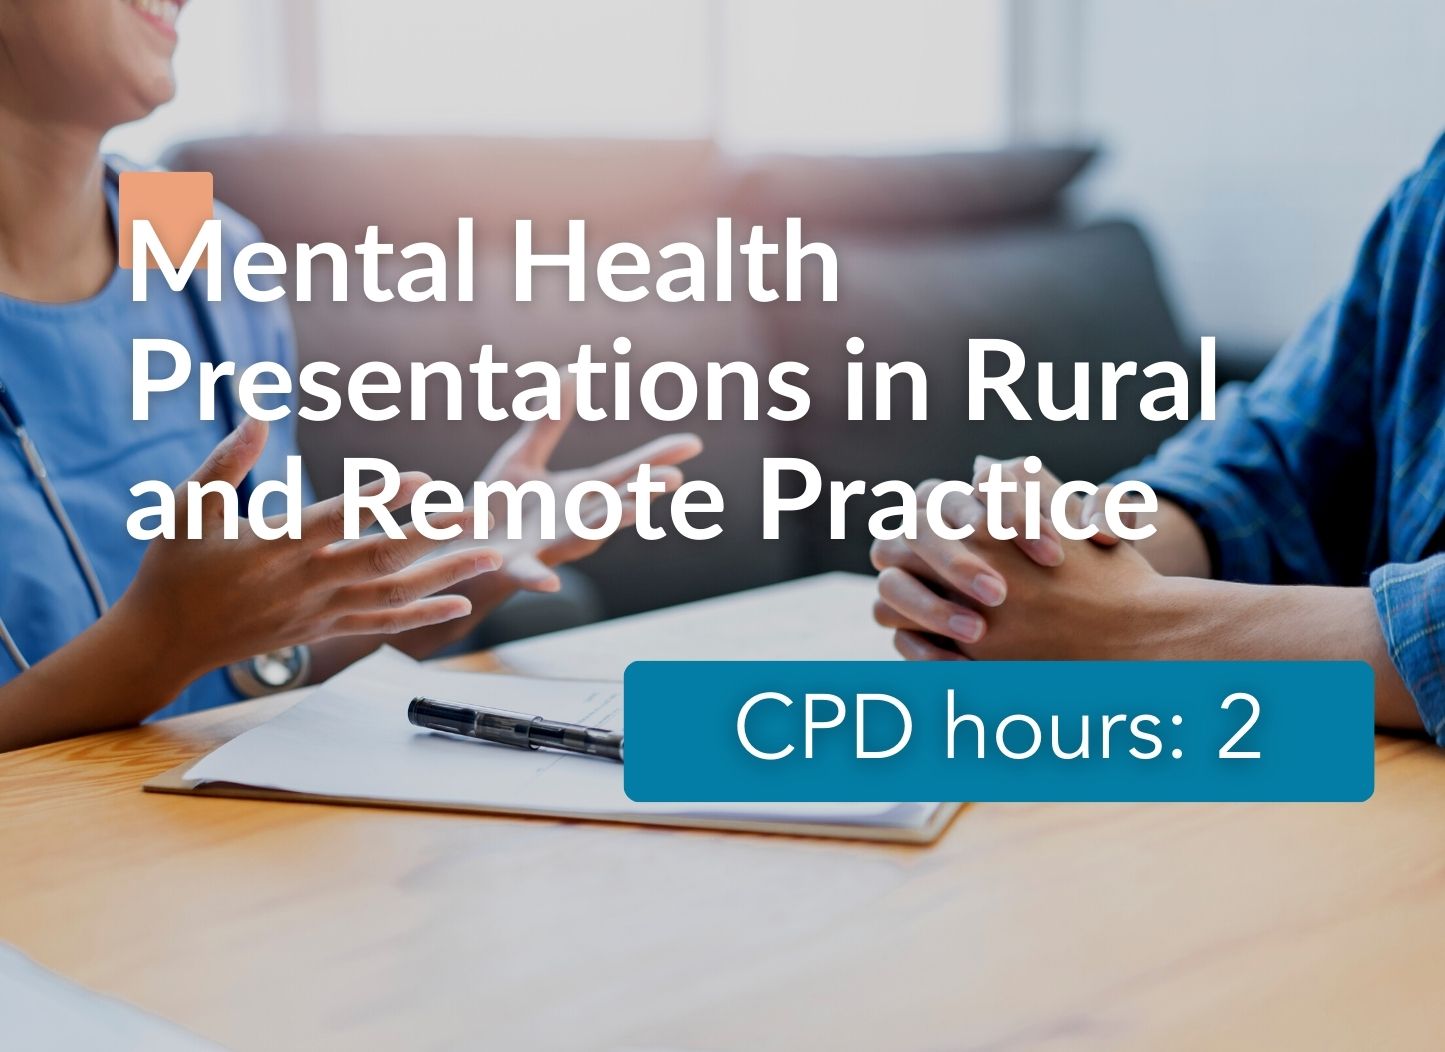 Mental Health Presentations in Rural and Remote Practice